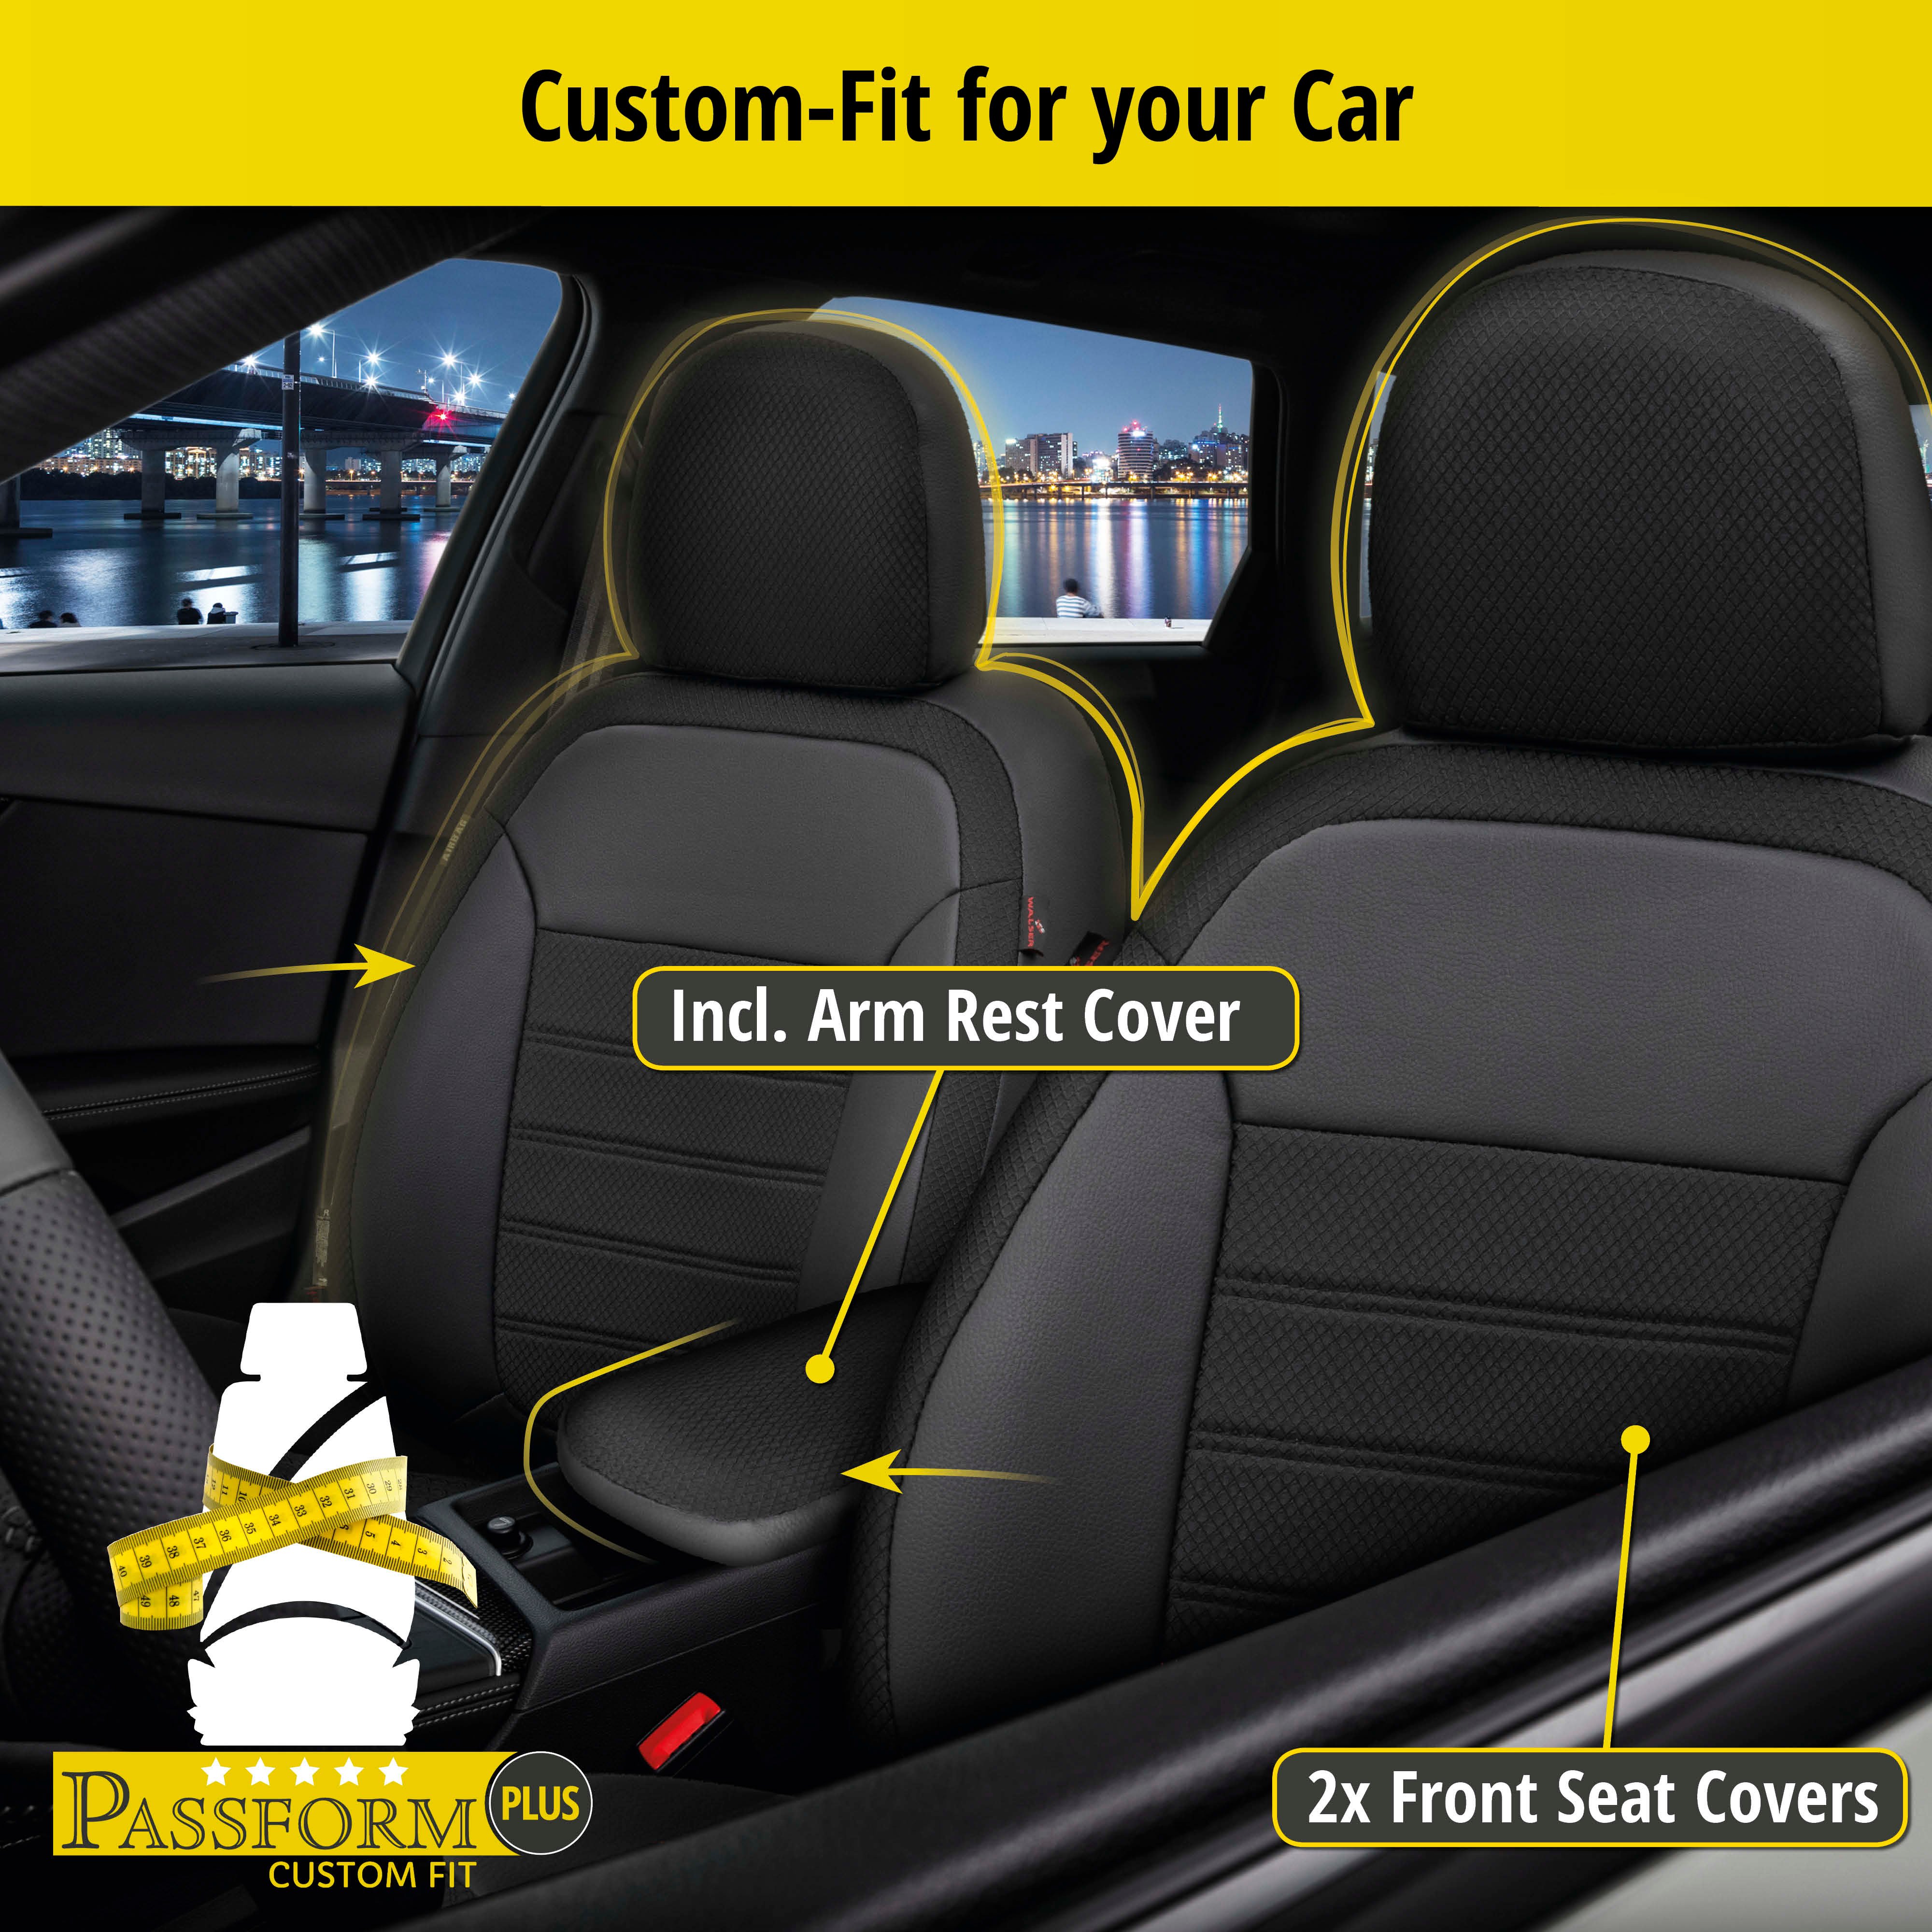 Seat Cover Aversa for VW Passat Variant (365) 08/2010-12/2015, 2 seat covers for normal seats